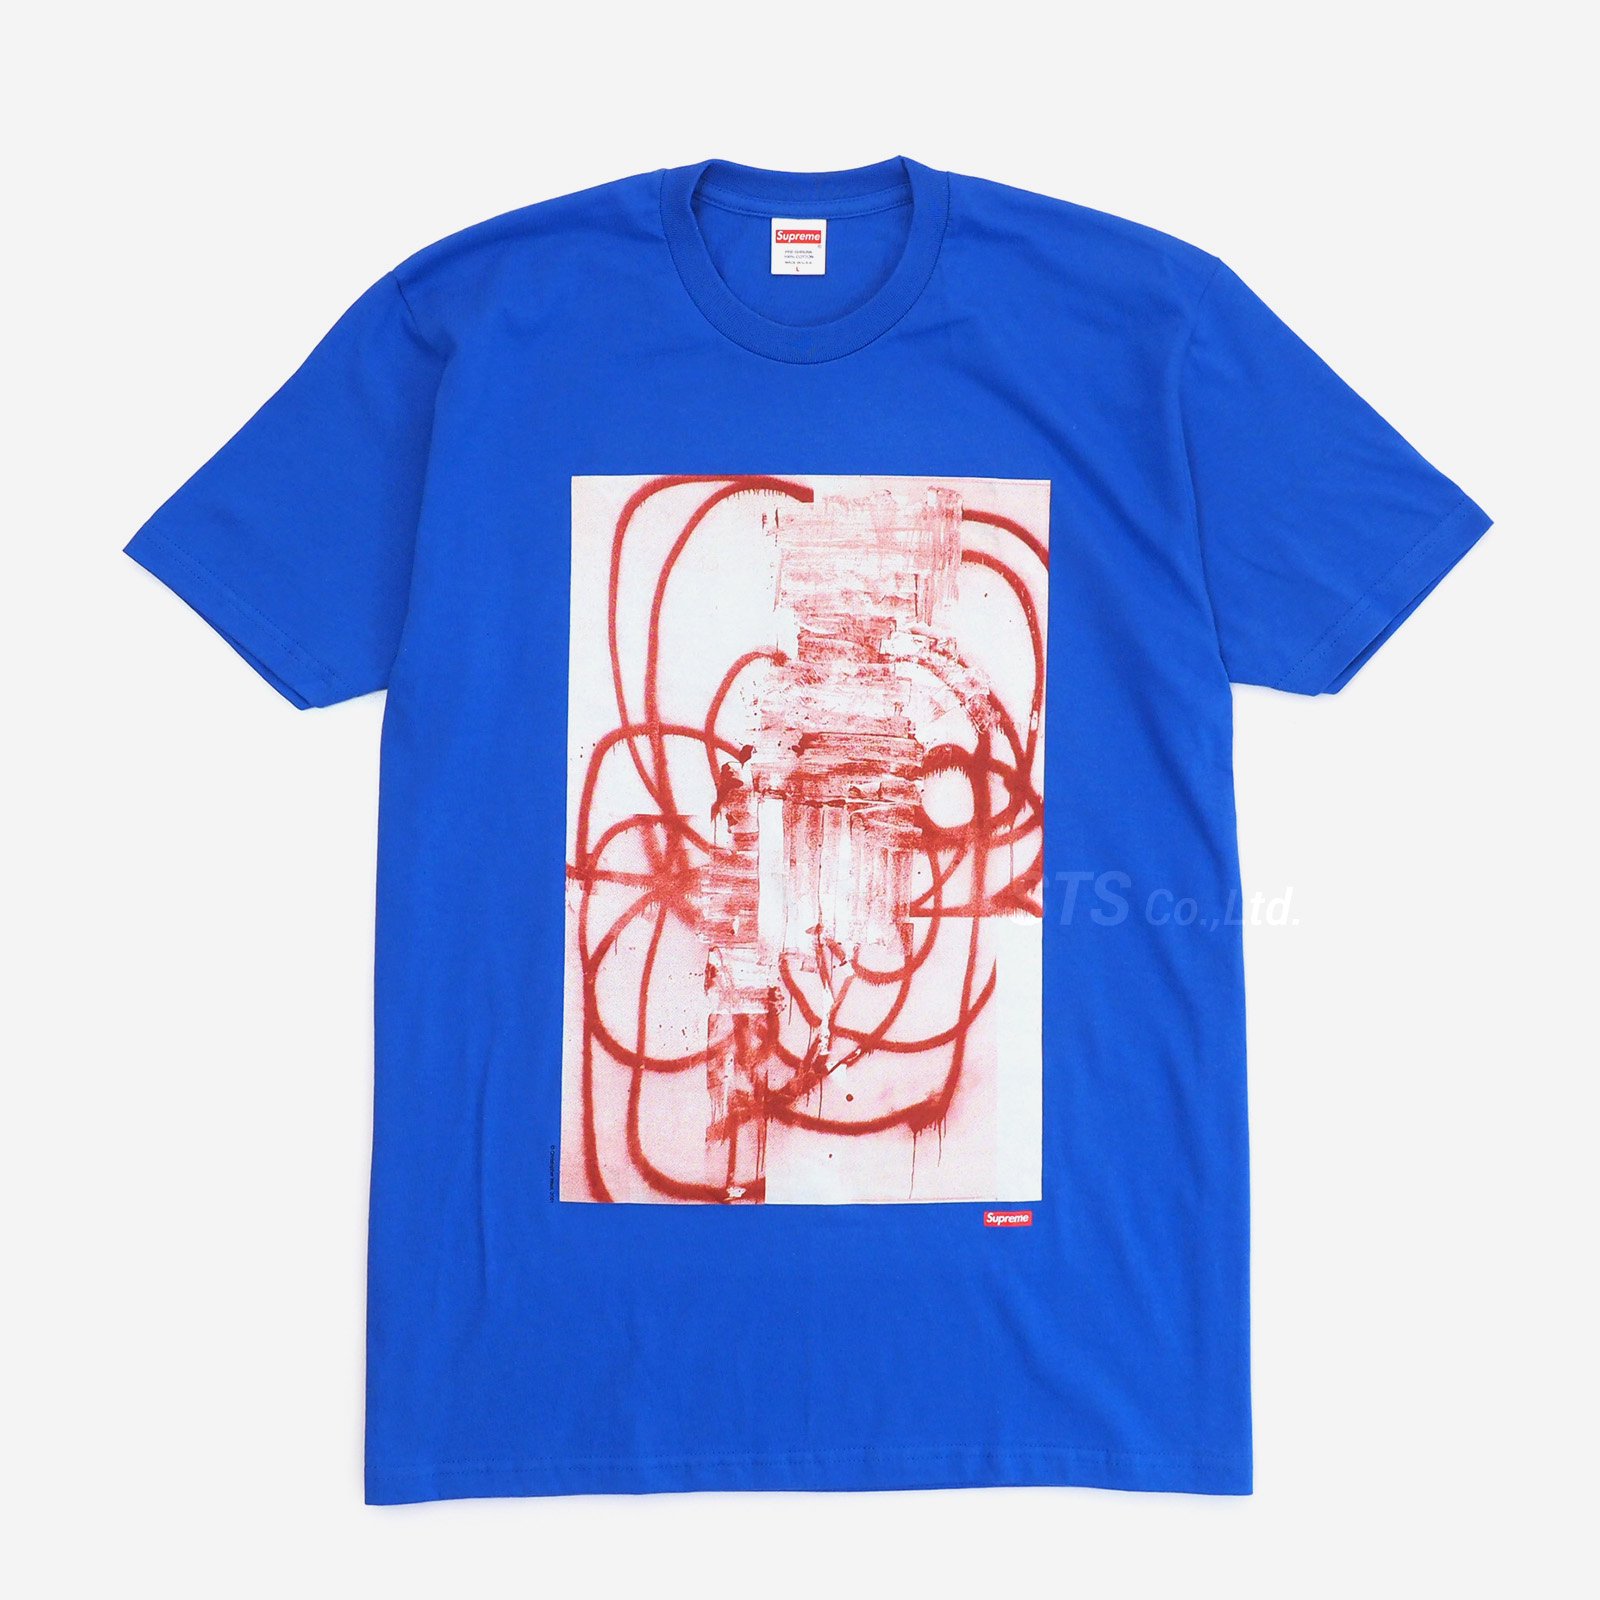 L☆黒☆Christopher Wool/Supreme 2001 Tee - Tシャツ/カットソー(半袖 ...